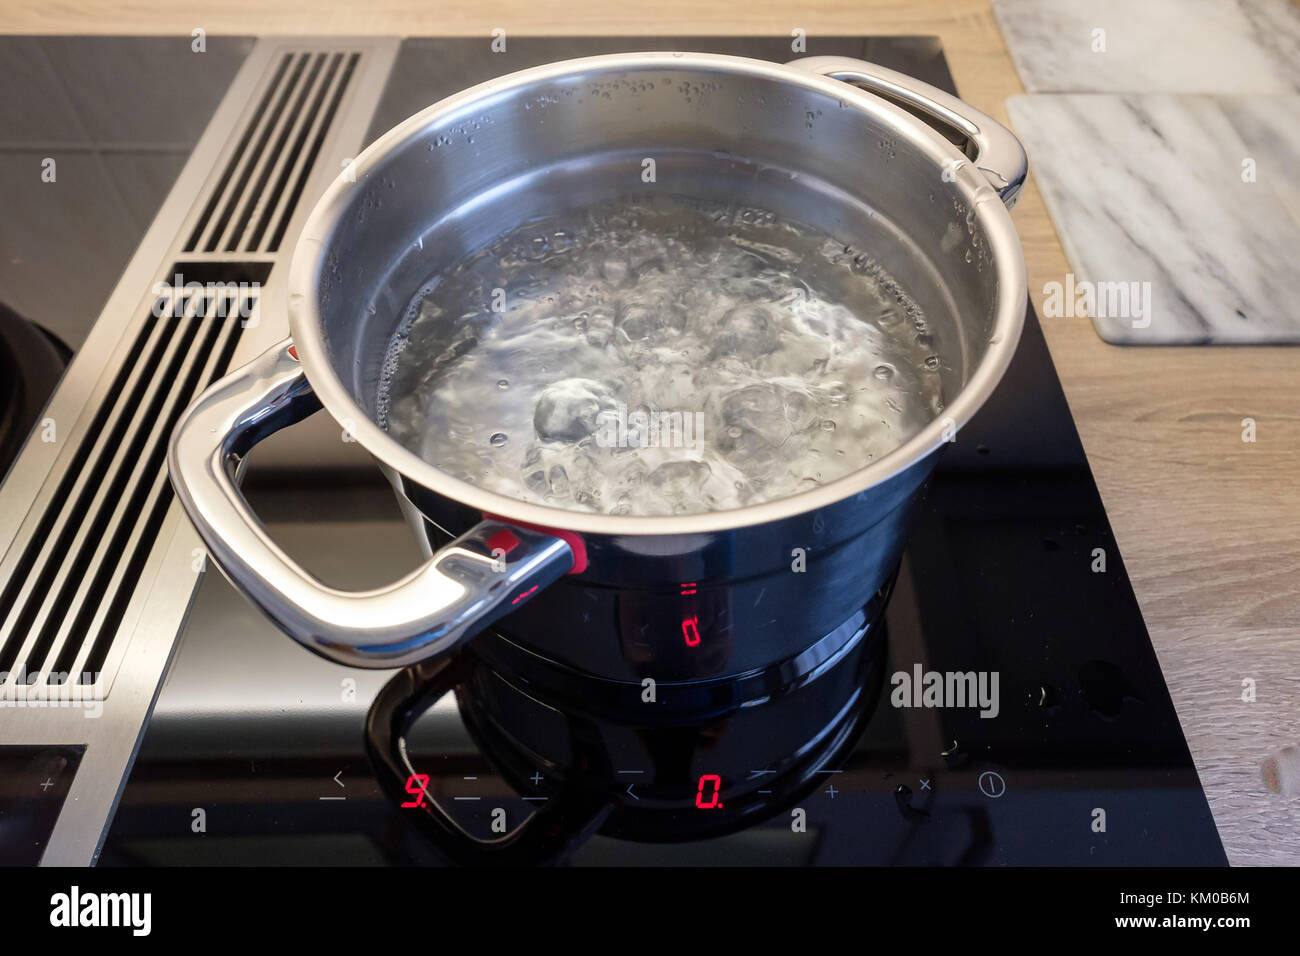 https://c8.alamy.com/comp/KM0B6M/cooking-pot-with-boiling-water-on-a-induction-stove-KM0B6M.jpg